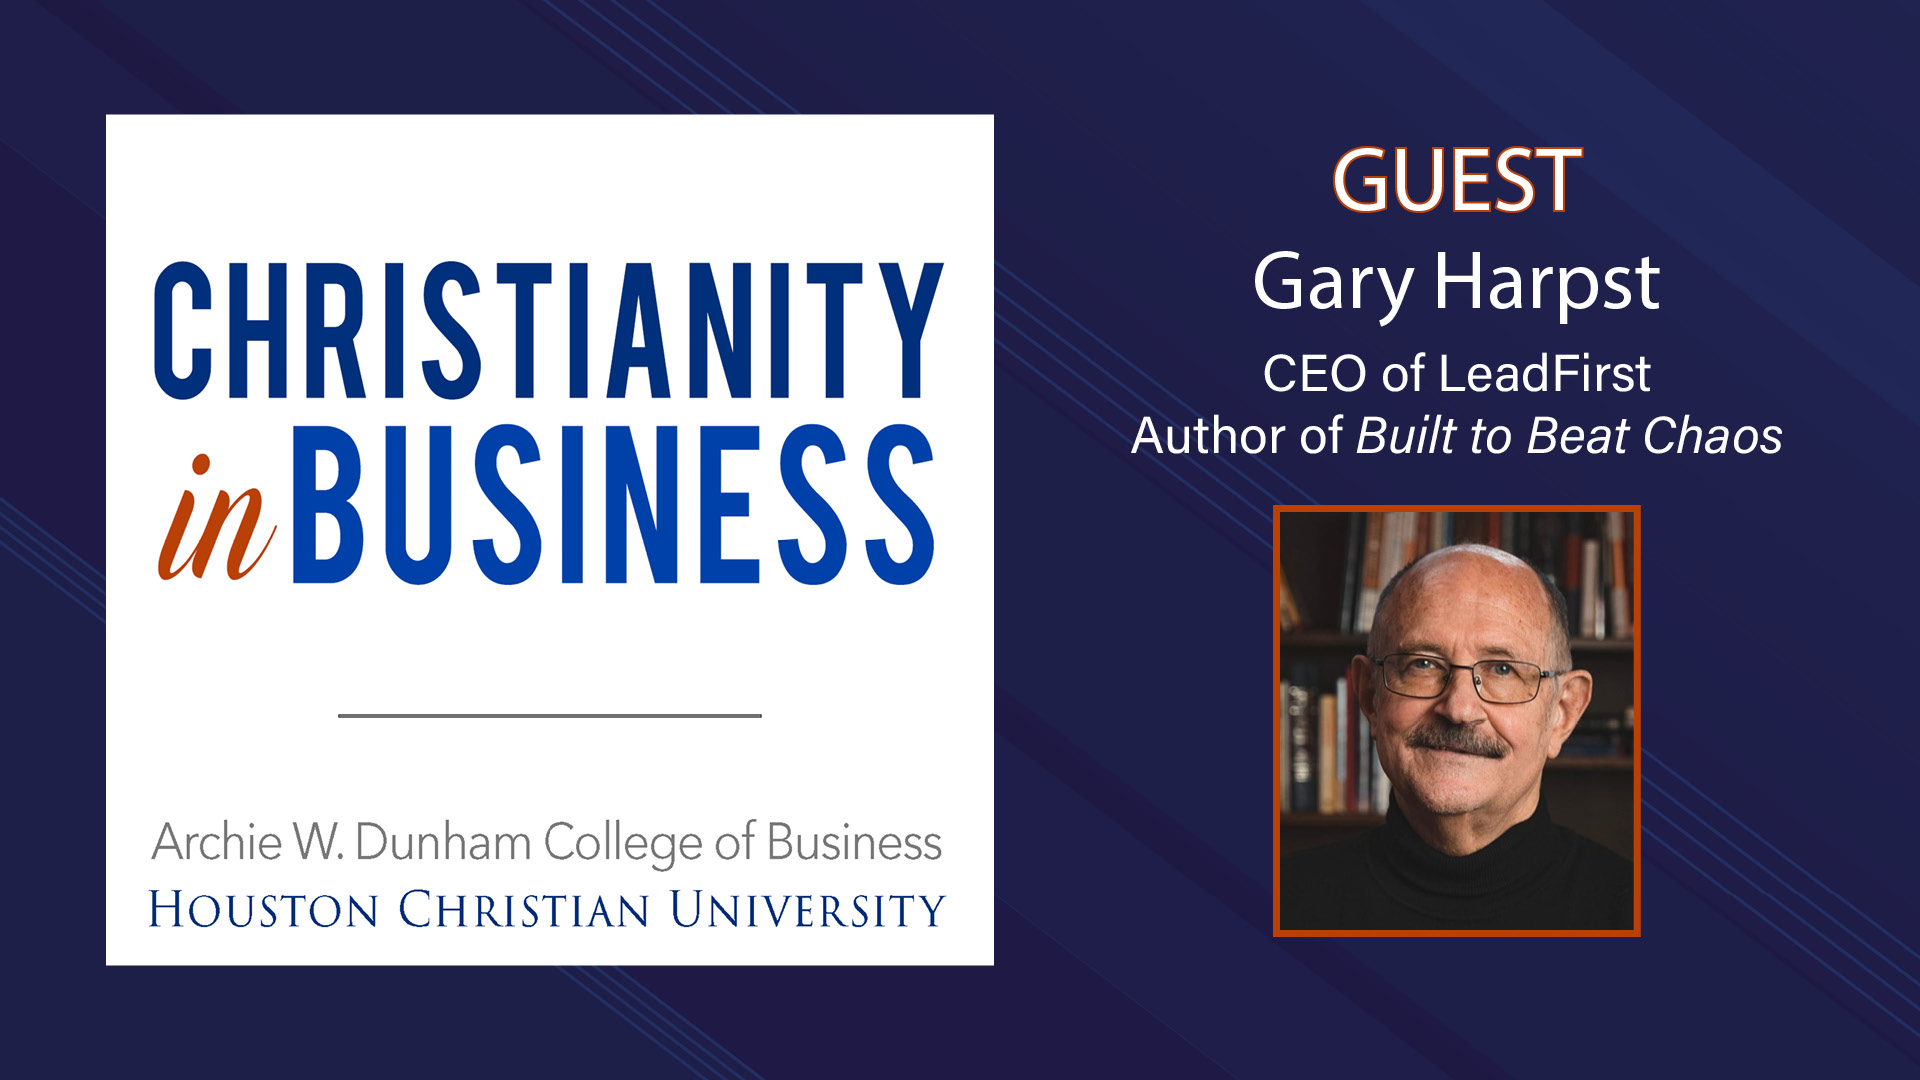 Gary Harpst, CEO of LeadFirst and author of Built to Beat Chaos, is guest of Christianity in Business podcast.